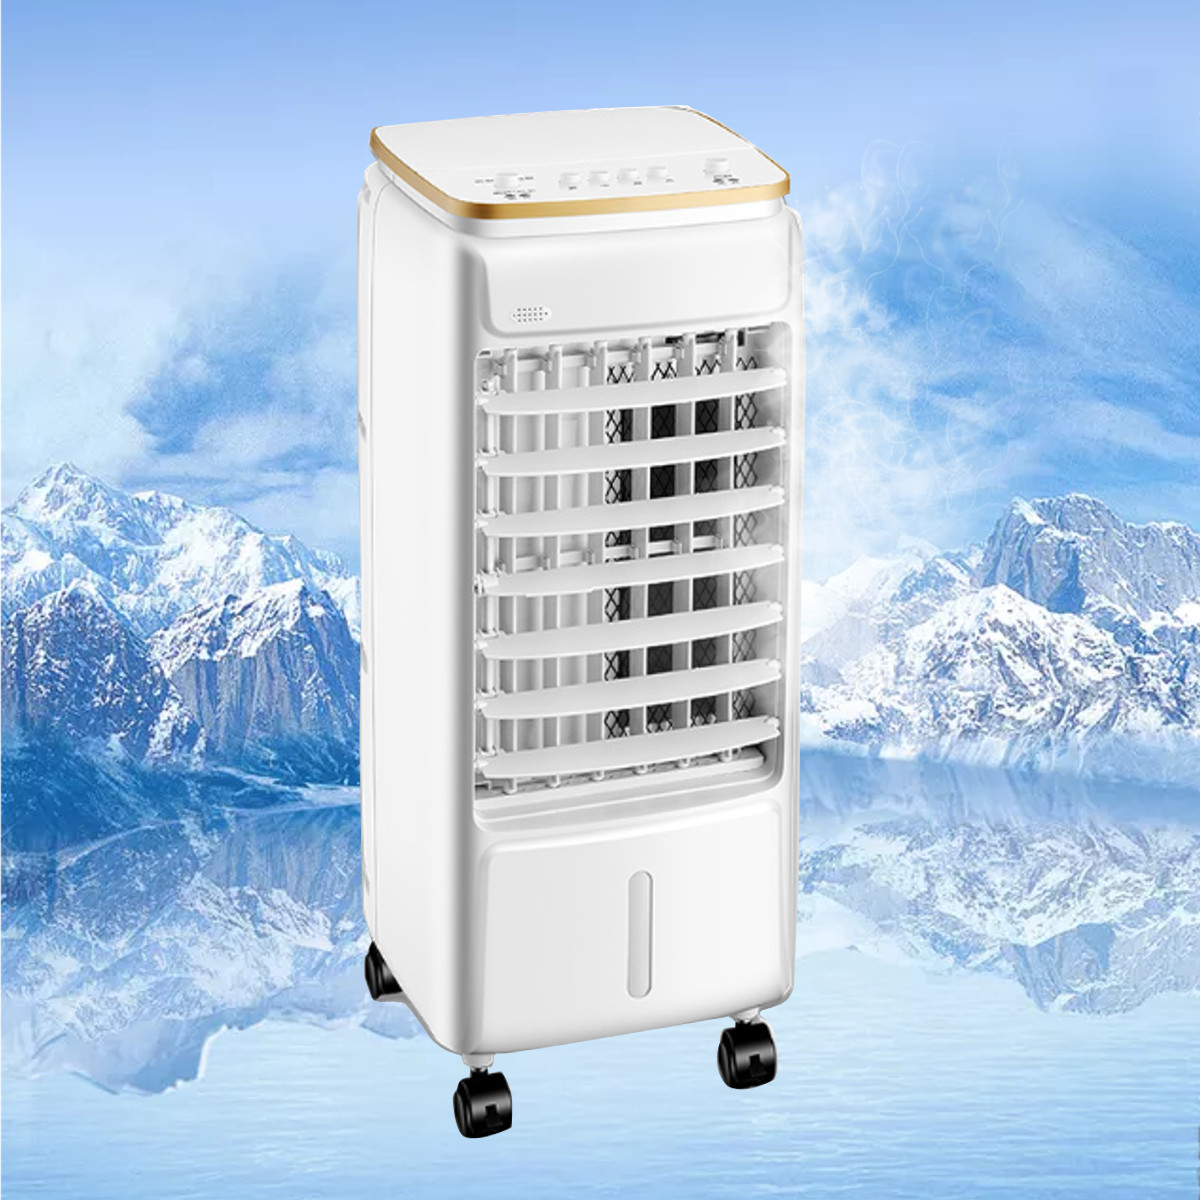 3 Gear Portable Movable Air Conditioning Cooler Fan Units ...